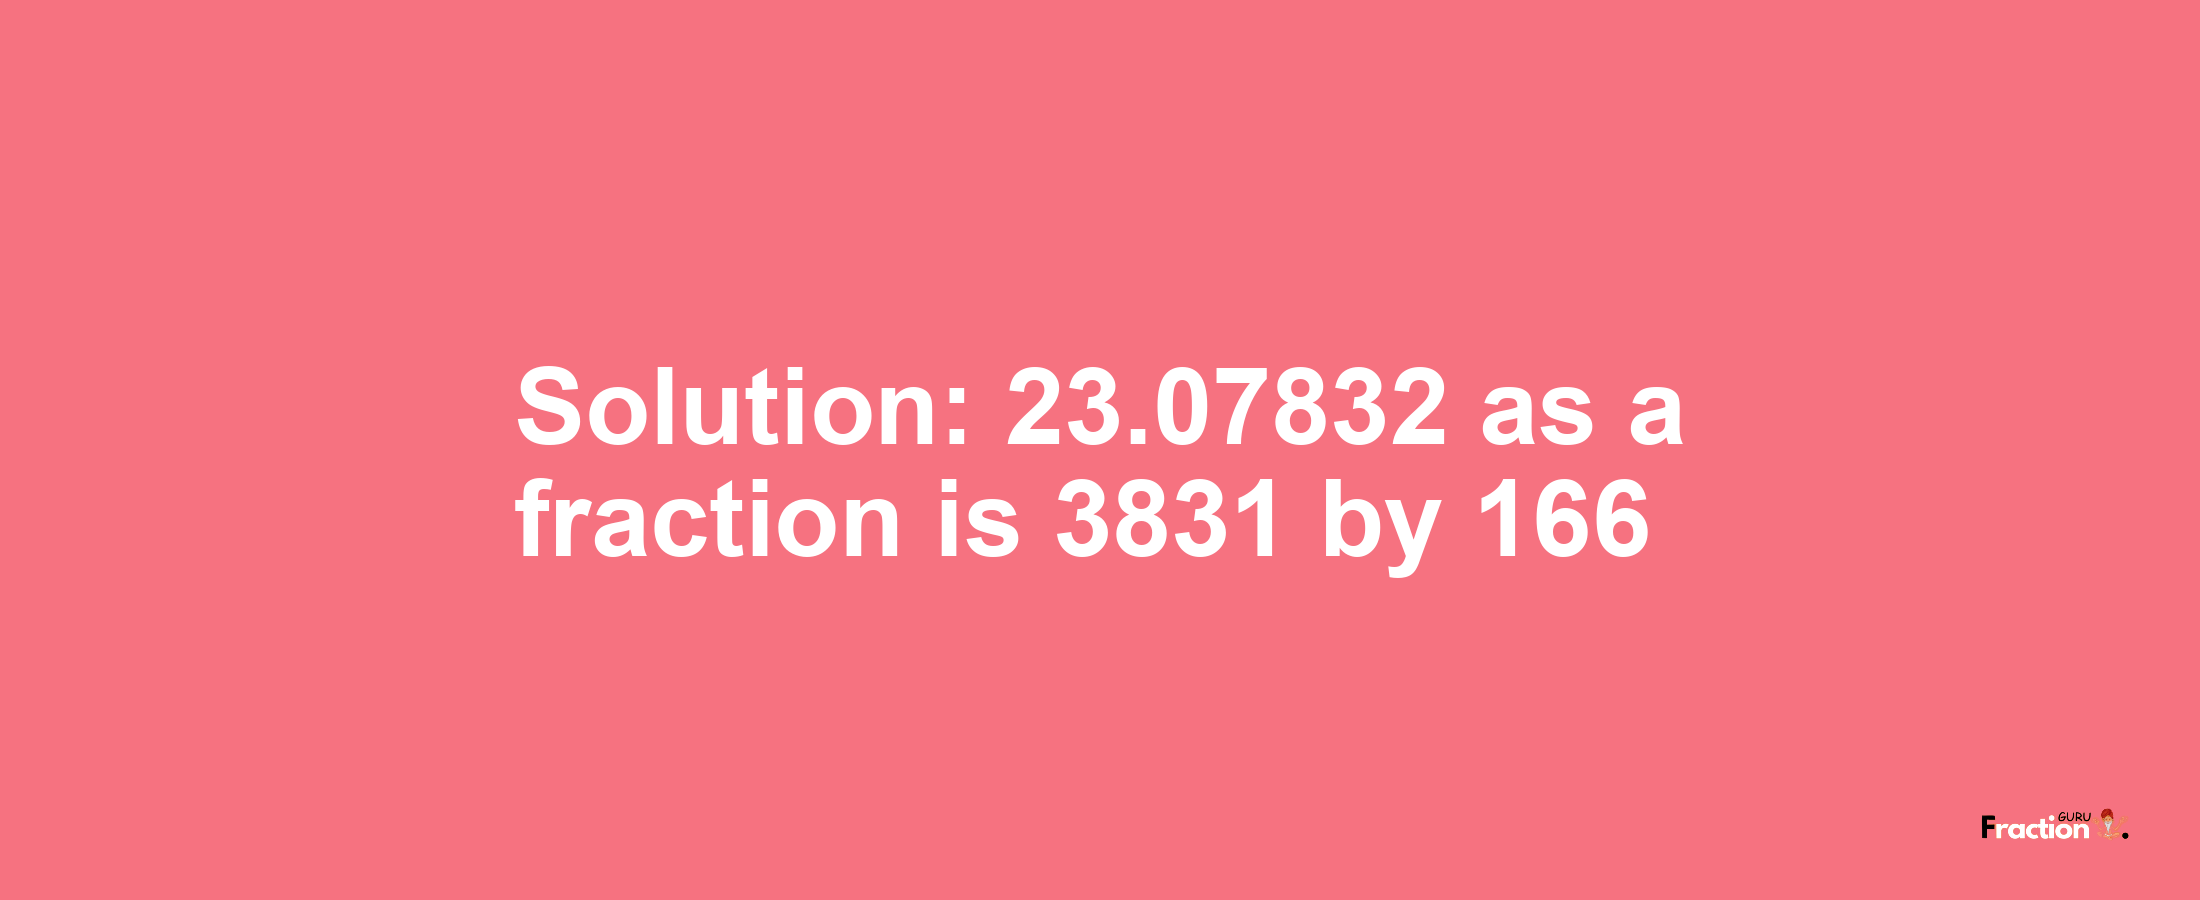 Solution:23.07832 as a fraction is 3831/166